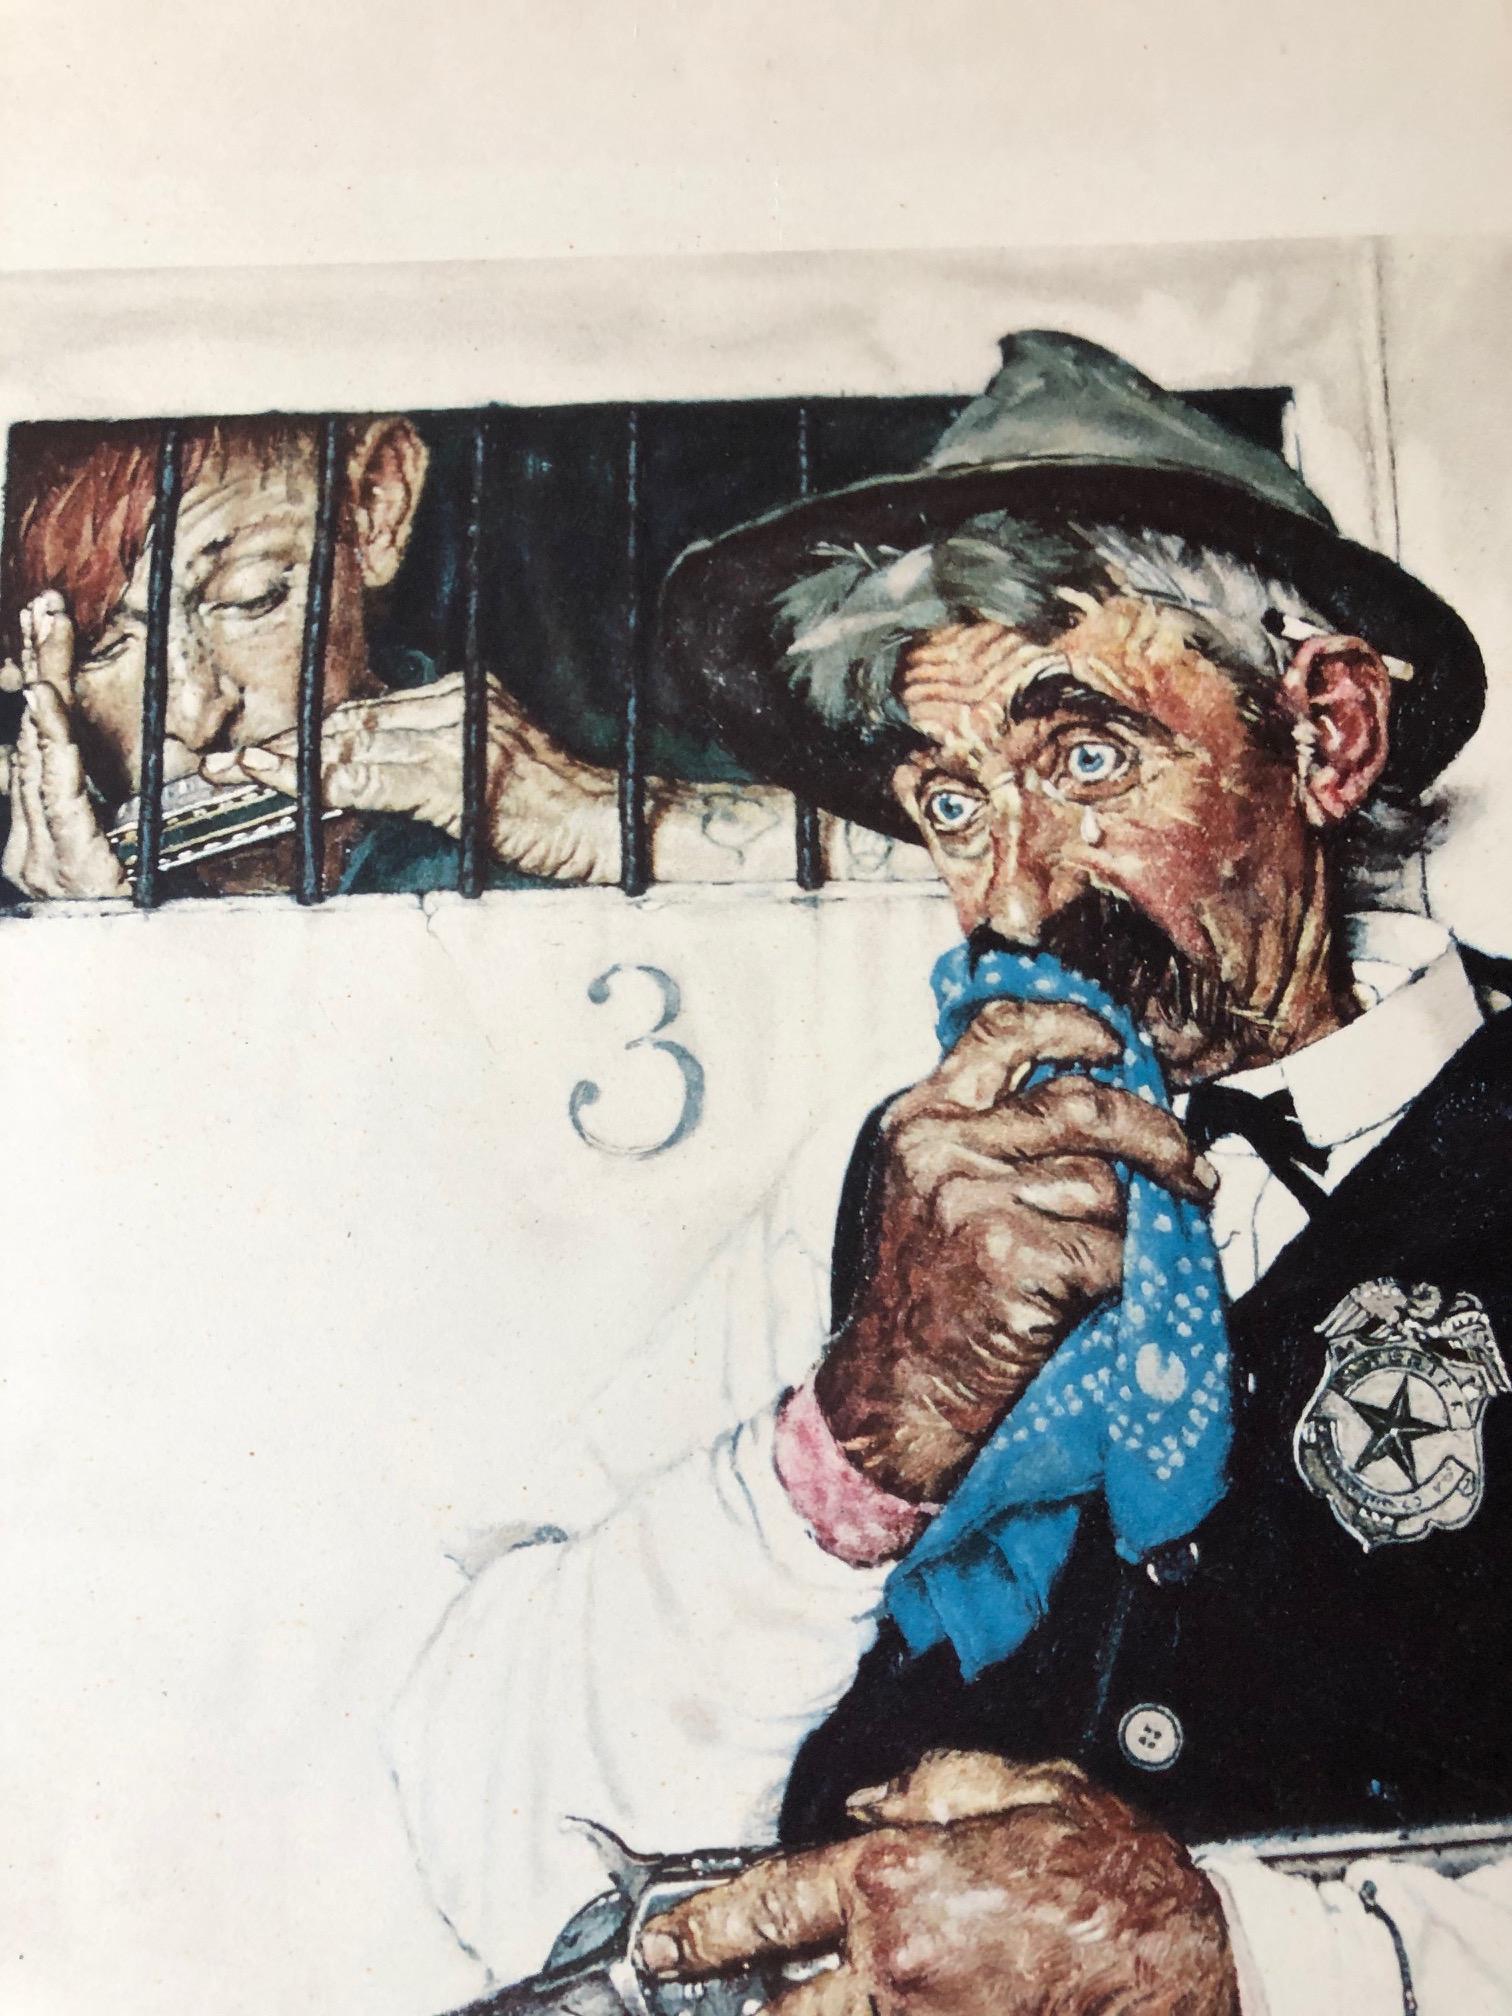 Offered at an exceptional price, this piece is in excellent condition and will ship rolled. Edition Artist Proof.

Signed and numbered by Norman Rockwell.
Published 1973, Gallery Retail $4,200.